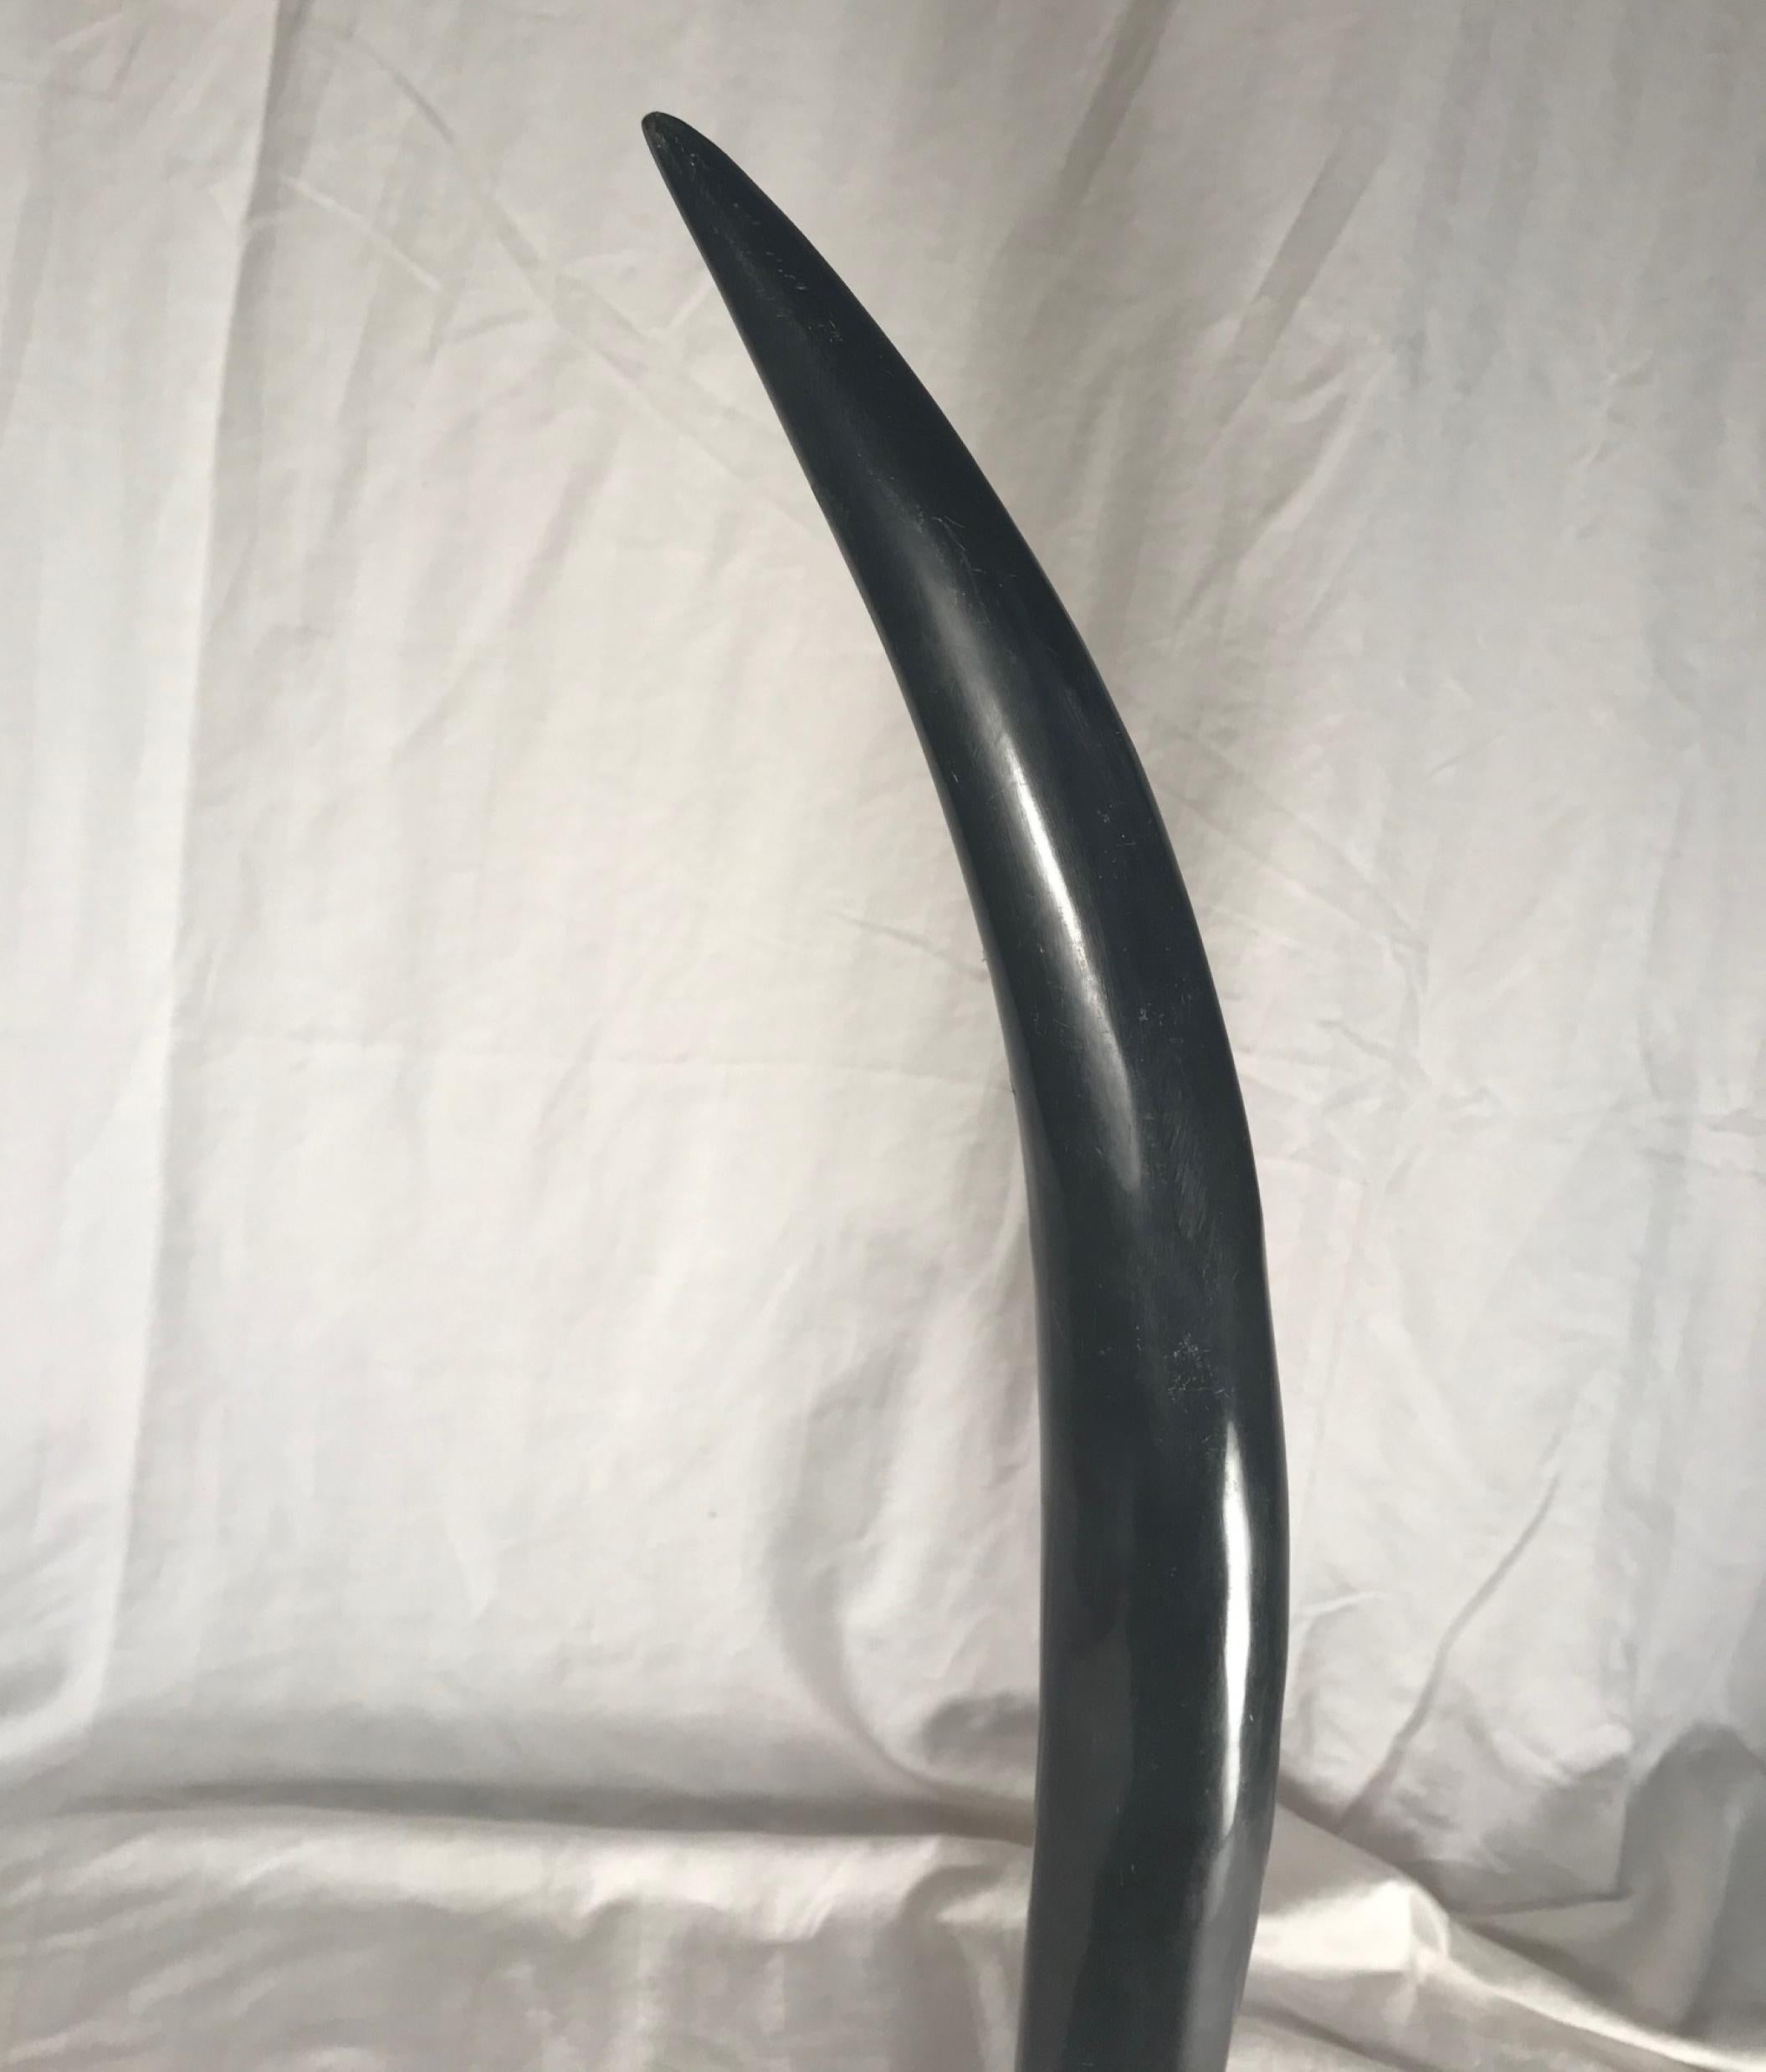 Vintage large black steer horn desk decoration on silver base

This large black steer horn with lighter colored striations represents the Classic image of an exotic sculpture. The natural horn has elegant appeal. It is mounted in a silver sleeve